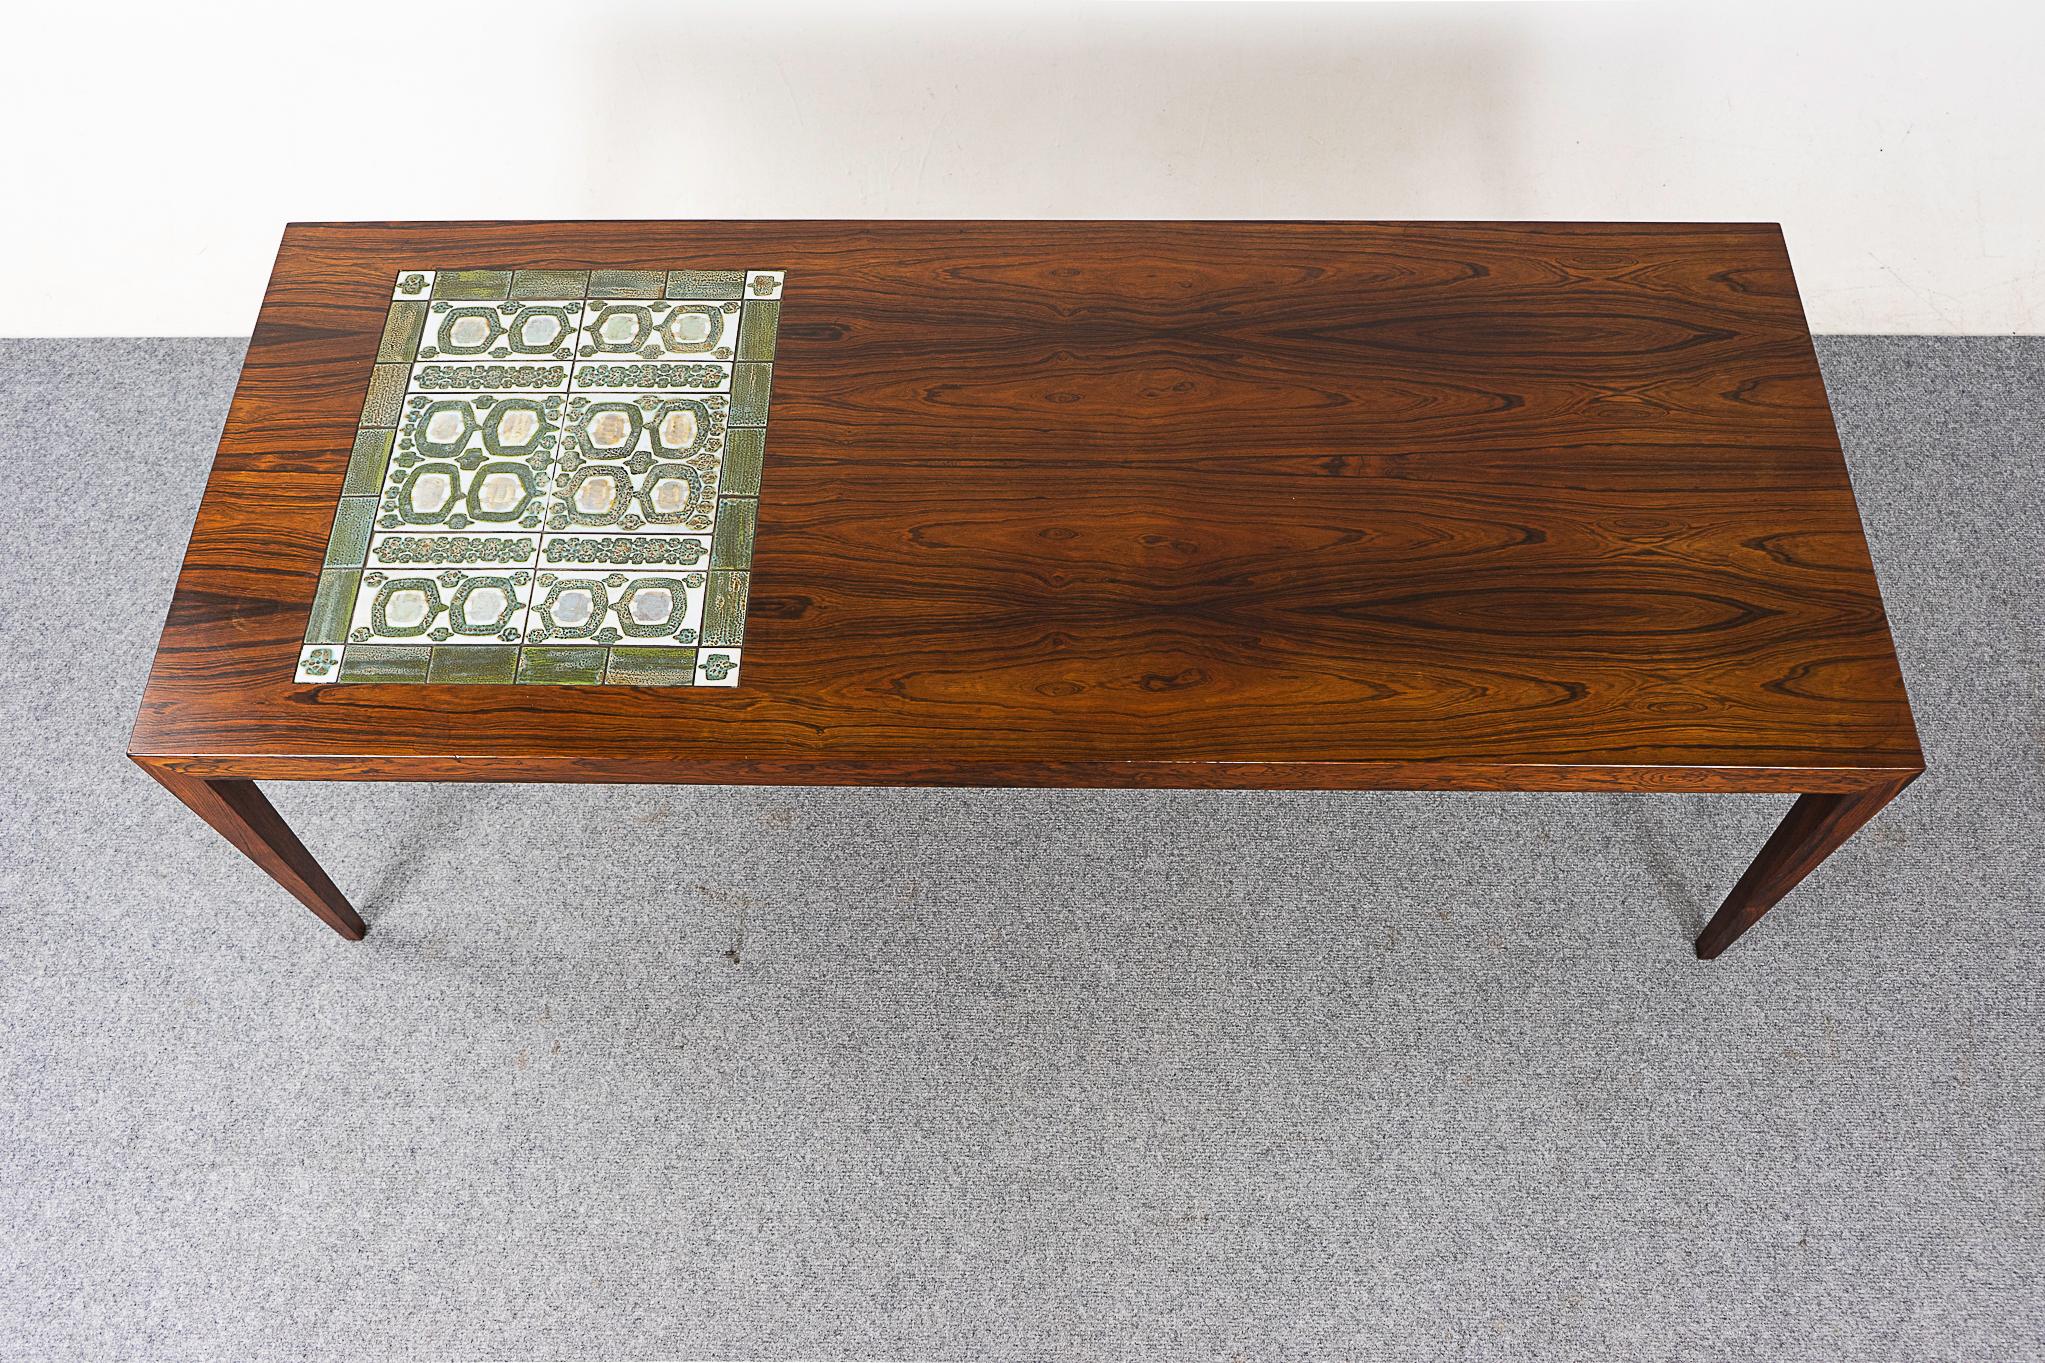 Ceramic Danish Modern Rosewood & Tile Coffee Table by Severin Hansen For Sale